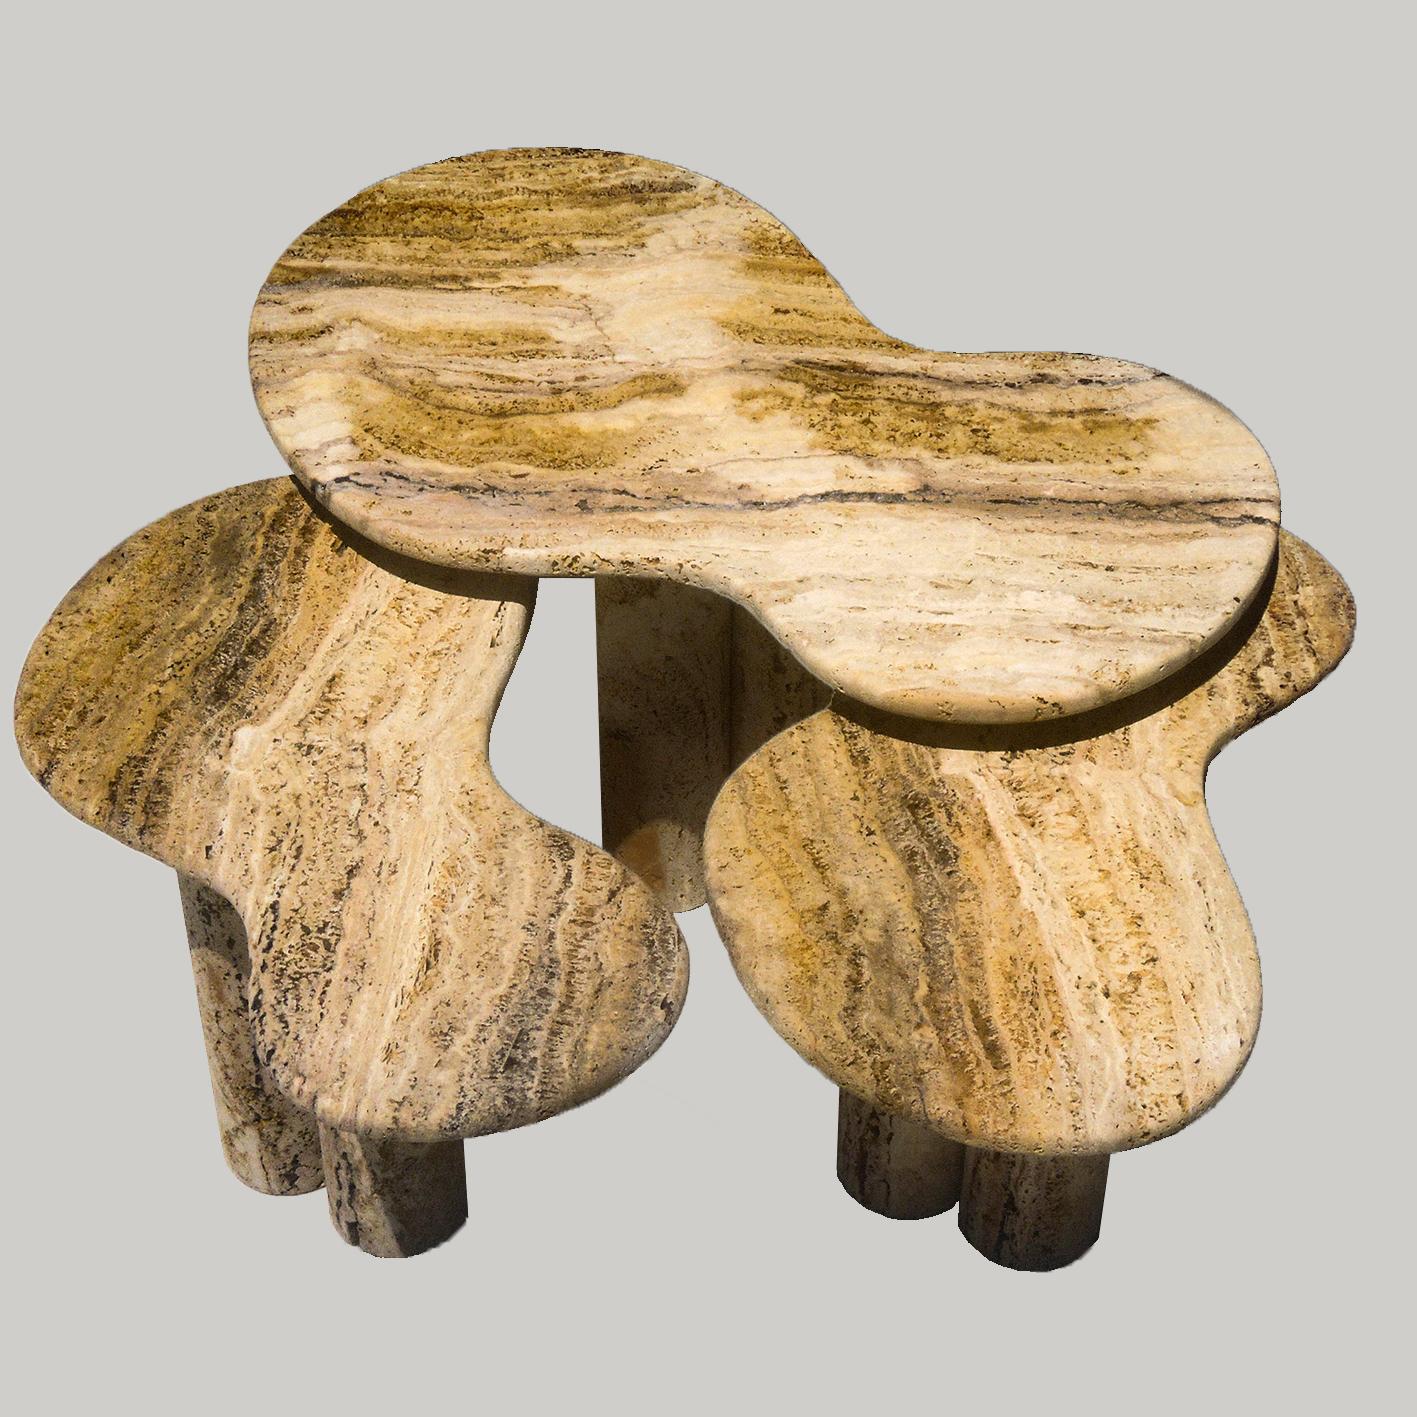 Modern Set of 3 Covertinos Nest Coffee Tables by Jean-fréderic Bourdier